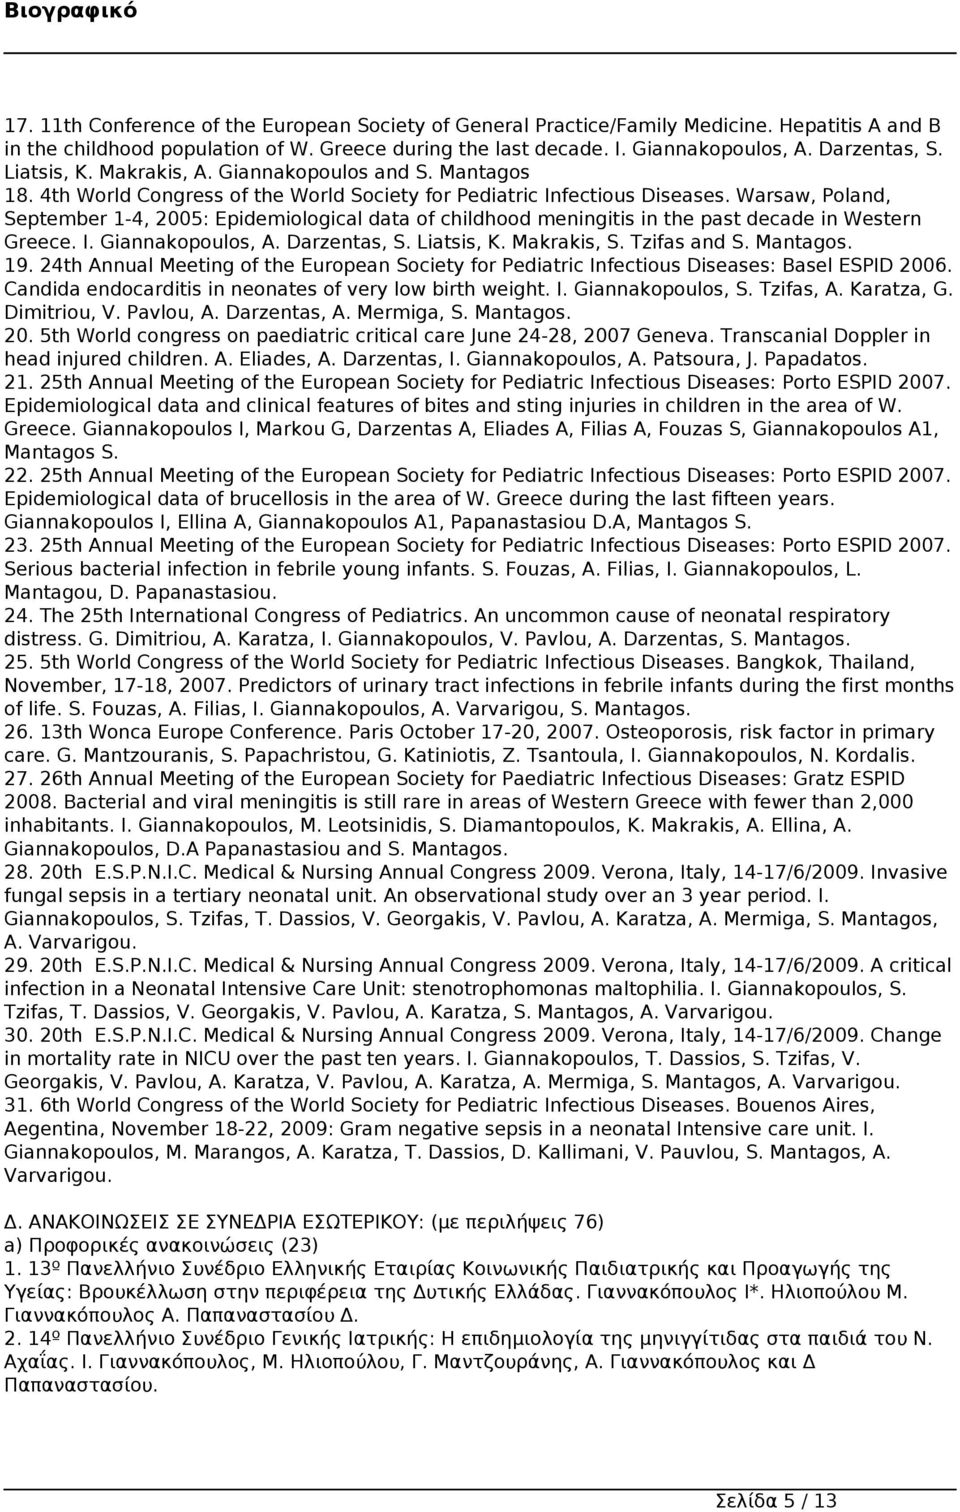 Warsaw, Poland, September 1-4, 2005: Epidemiological data of childhood meningitis in the past decade in Western Greece. I. Giannakopoulos, A. Darzentas, S. Liatsis, K. Makrakis, S. Tzifas and S.